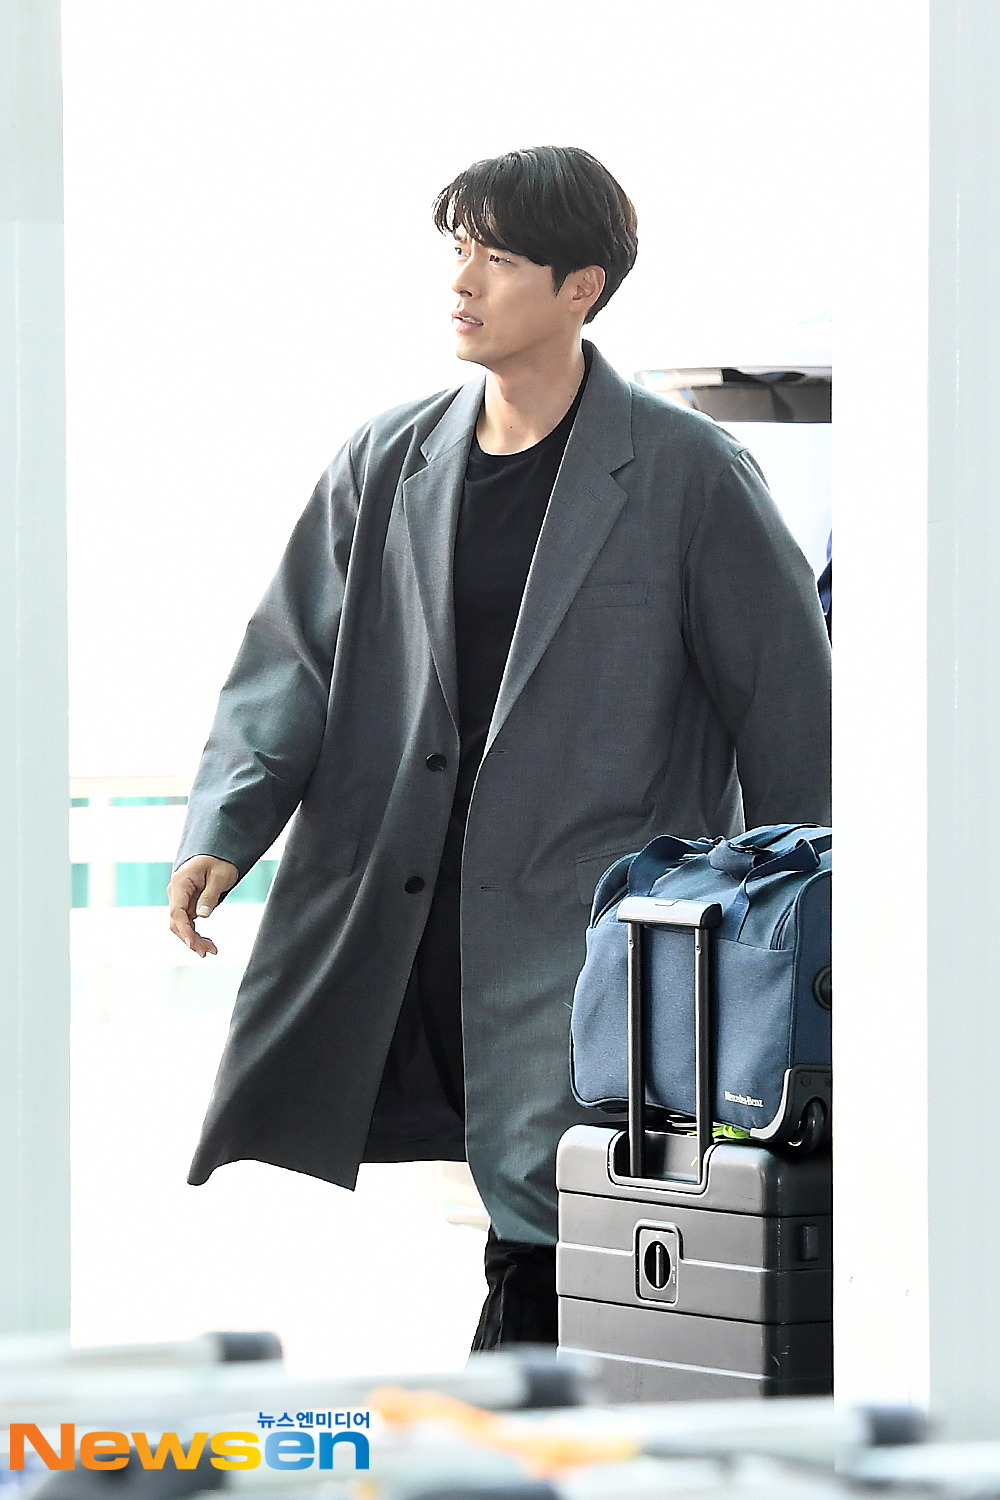 Actor Hyun Bin departed for Hong Kong on May 10 afternoon for a schedule for overseas fan meetings of LOG INTO THE SPACE -2019 Hyun Bin Fan Meeting Tour - in Hong Kong held in Hong Kong through Incheon International Airport in Unseo-dong, Jung-gu, Incheon.Actor Hyun Bin is leaving for Hong Kong with an airport fashion.exponential earthquake